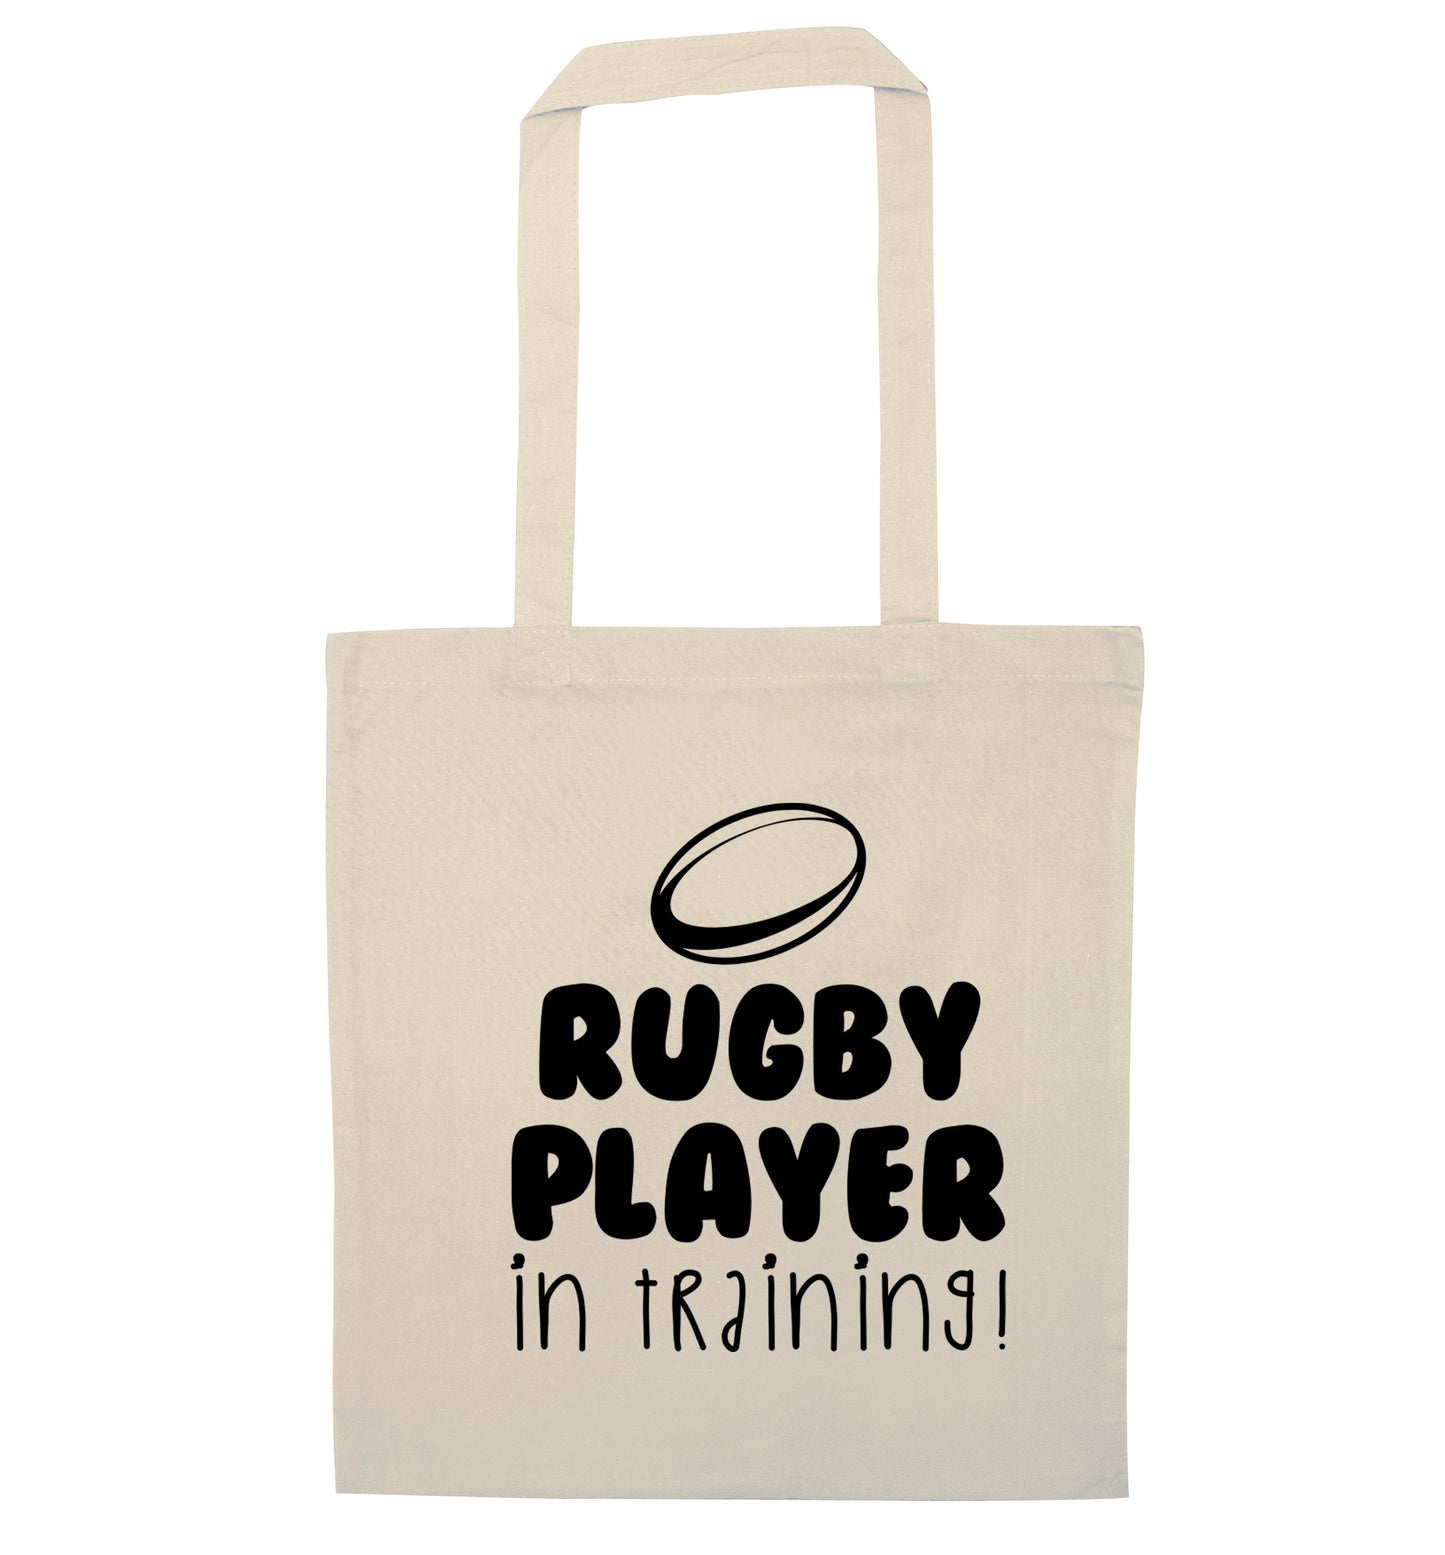 Rugby player in training natural tote bag